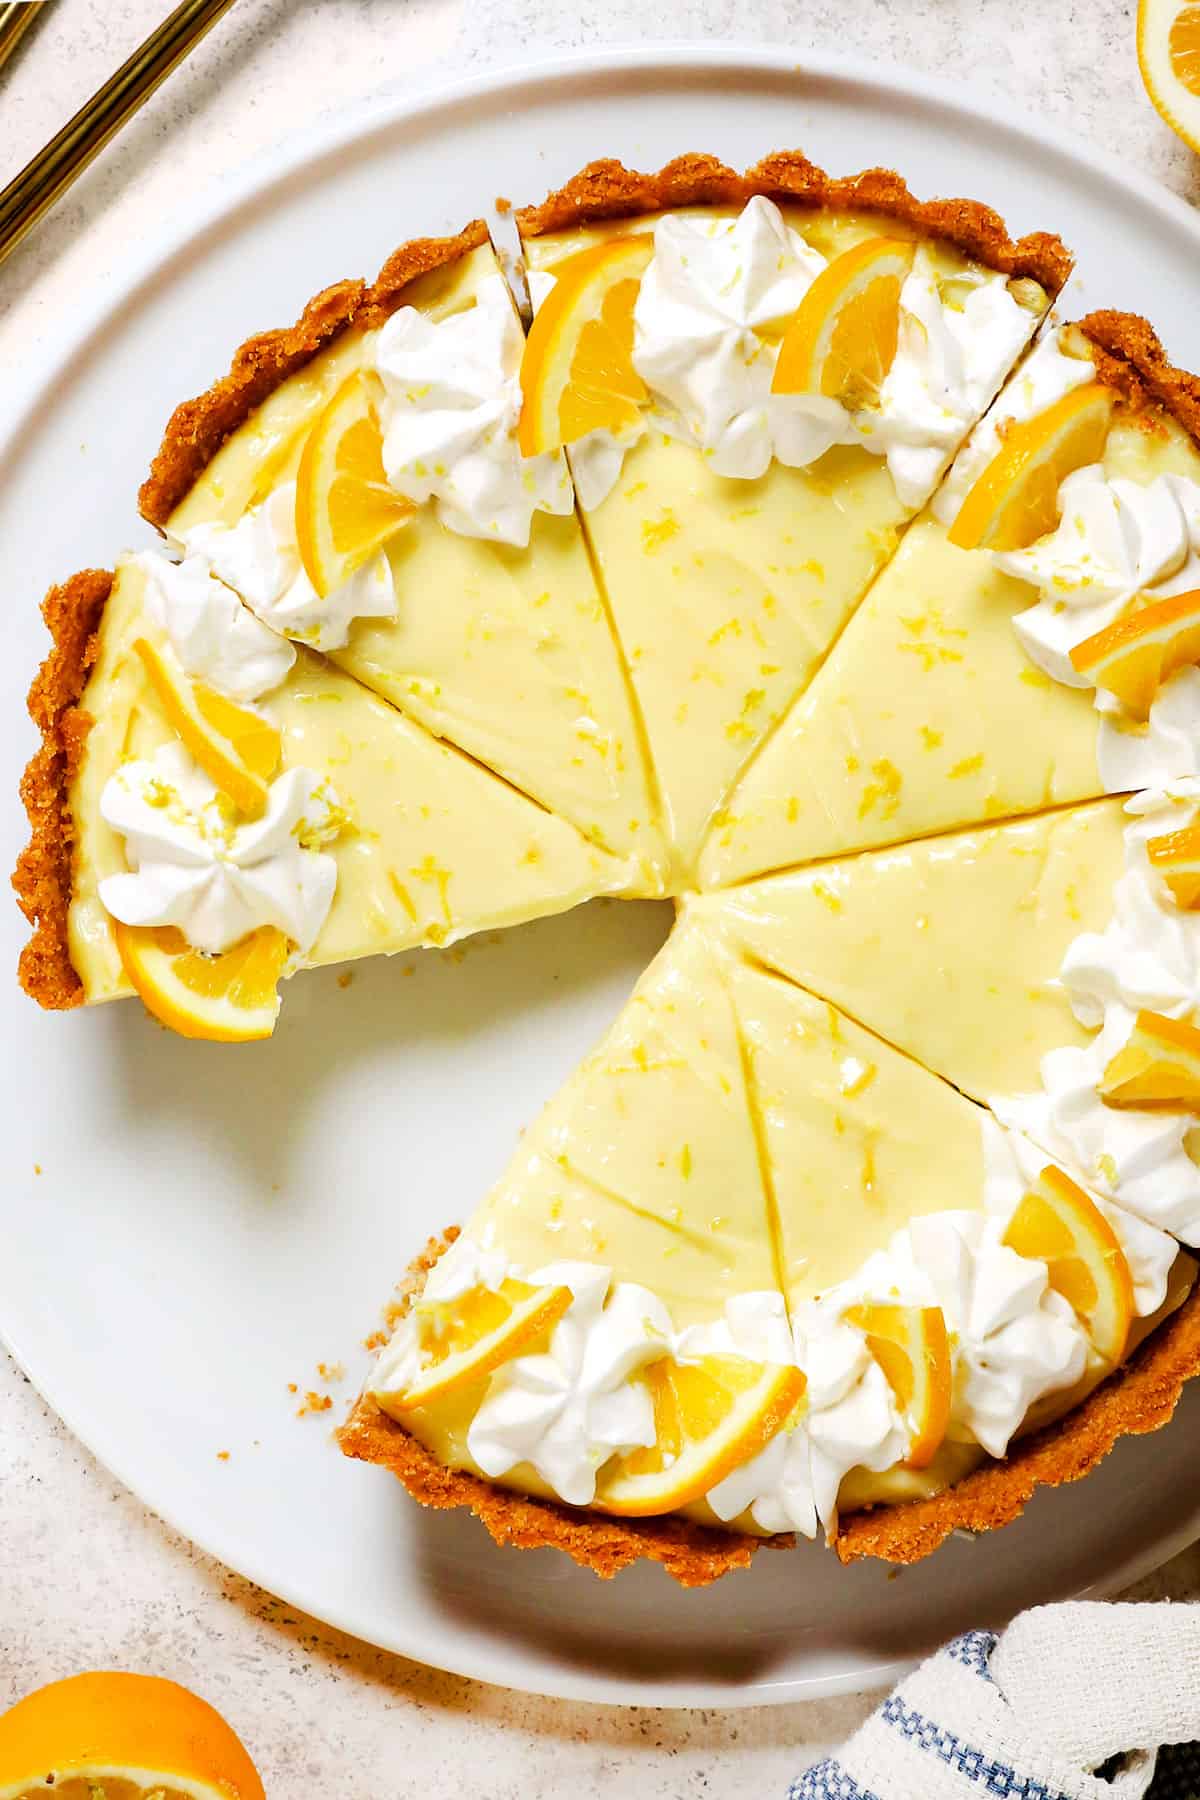 top view of lemon pie recipe showing how to decorate with whipped cream topping